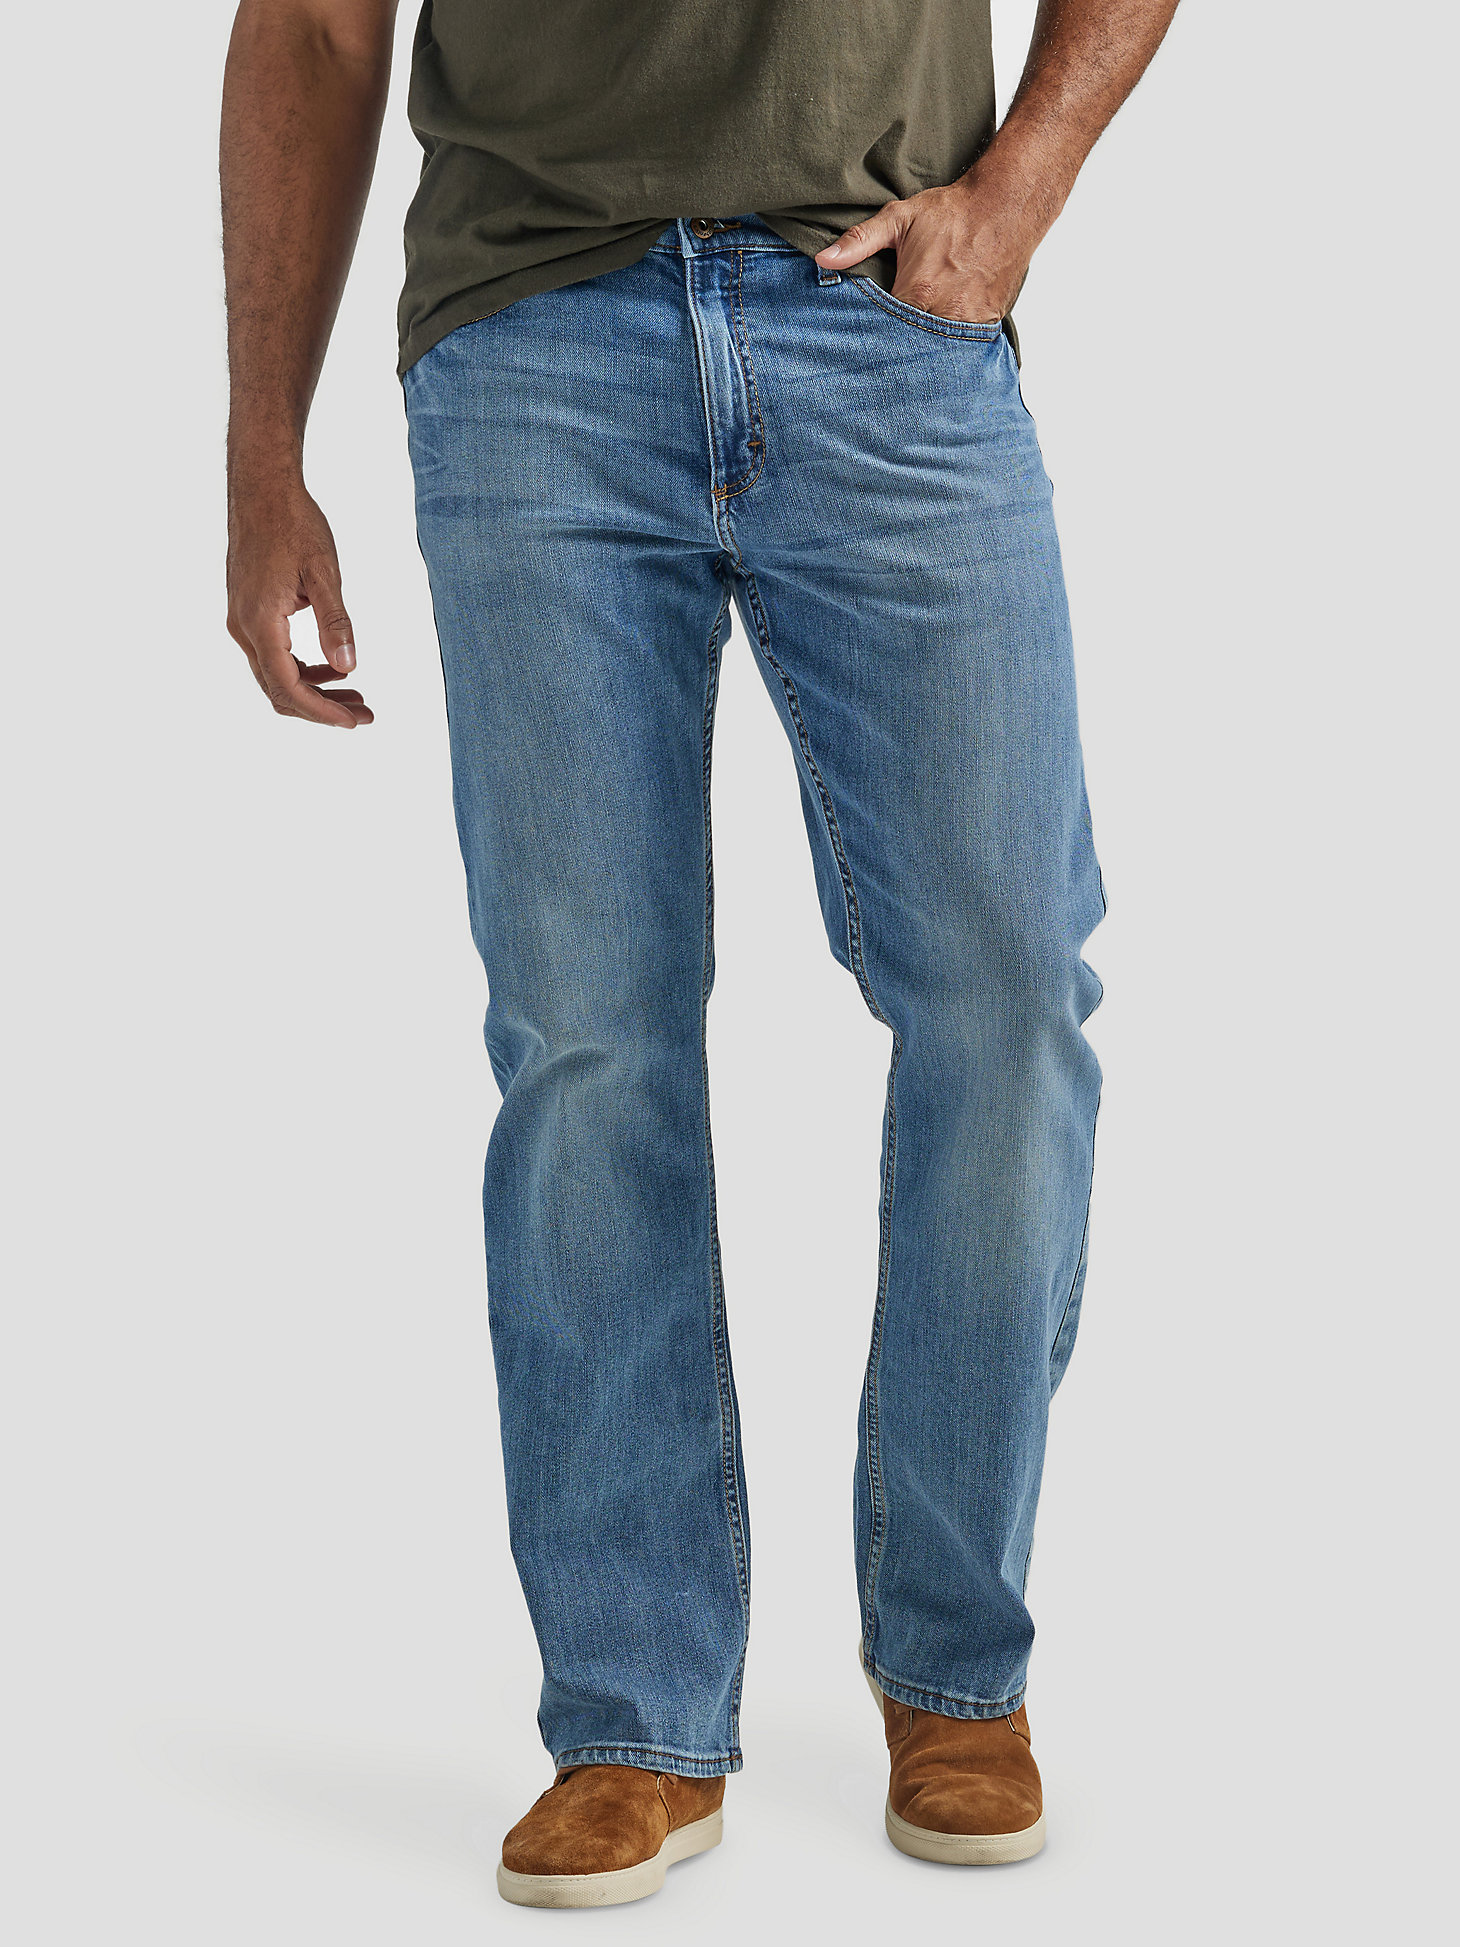 Men's Wrangler Authentics® Relaxed Fit Bootcut Jean in Riptide main view